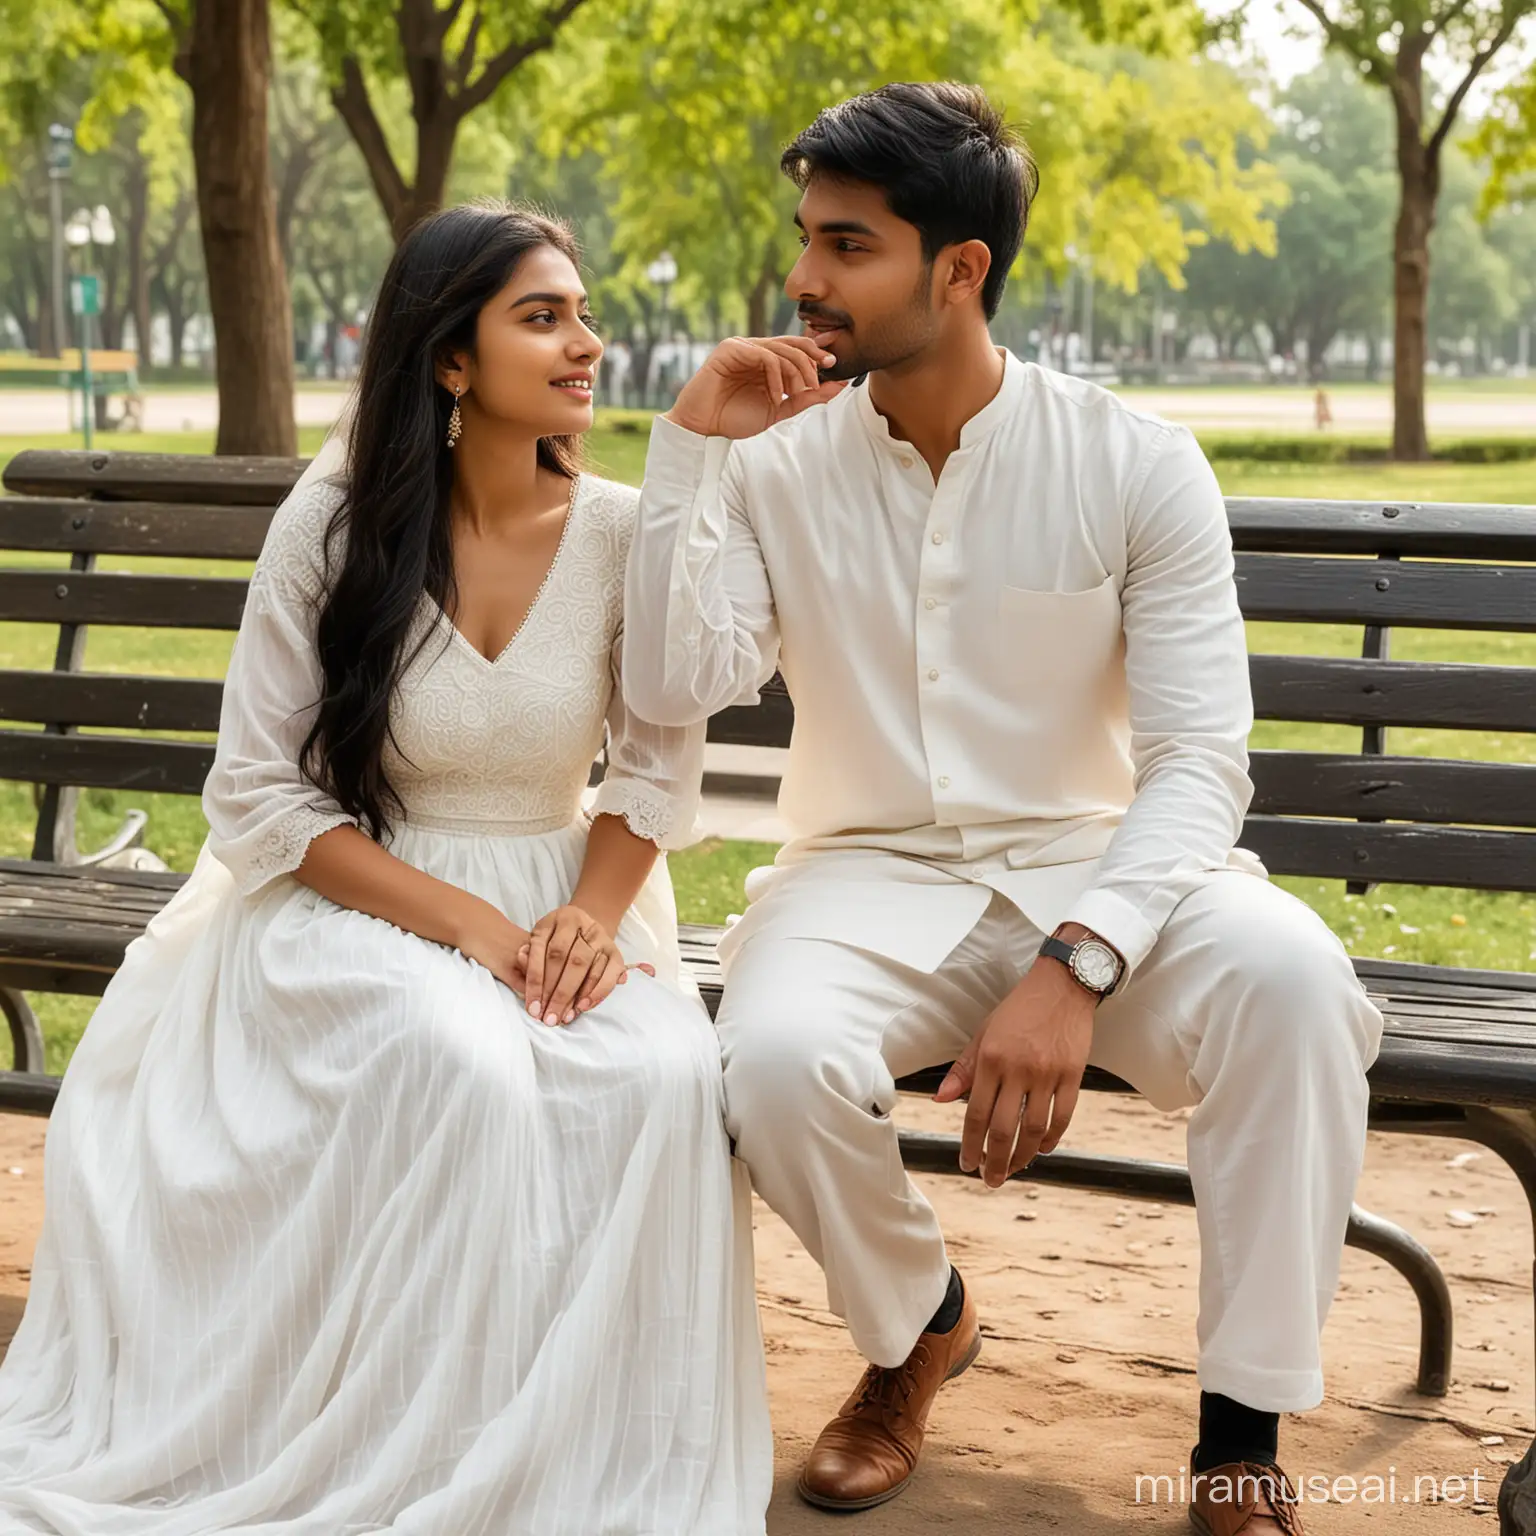 Modern Indian Couple Sitting on Park Bench